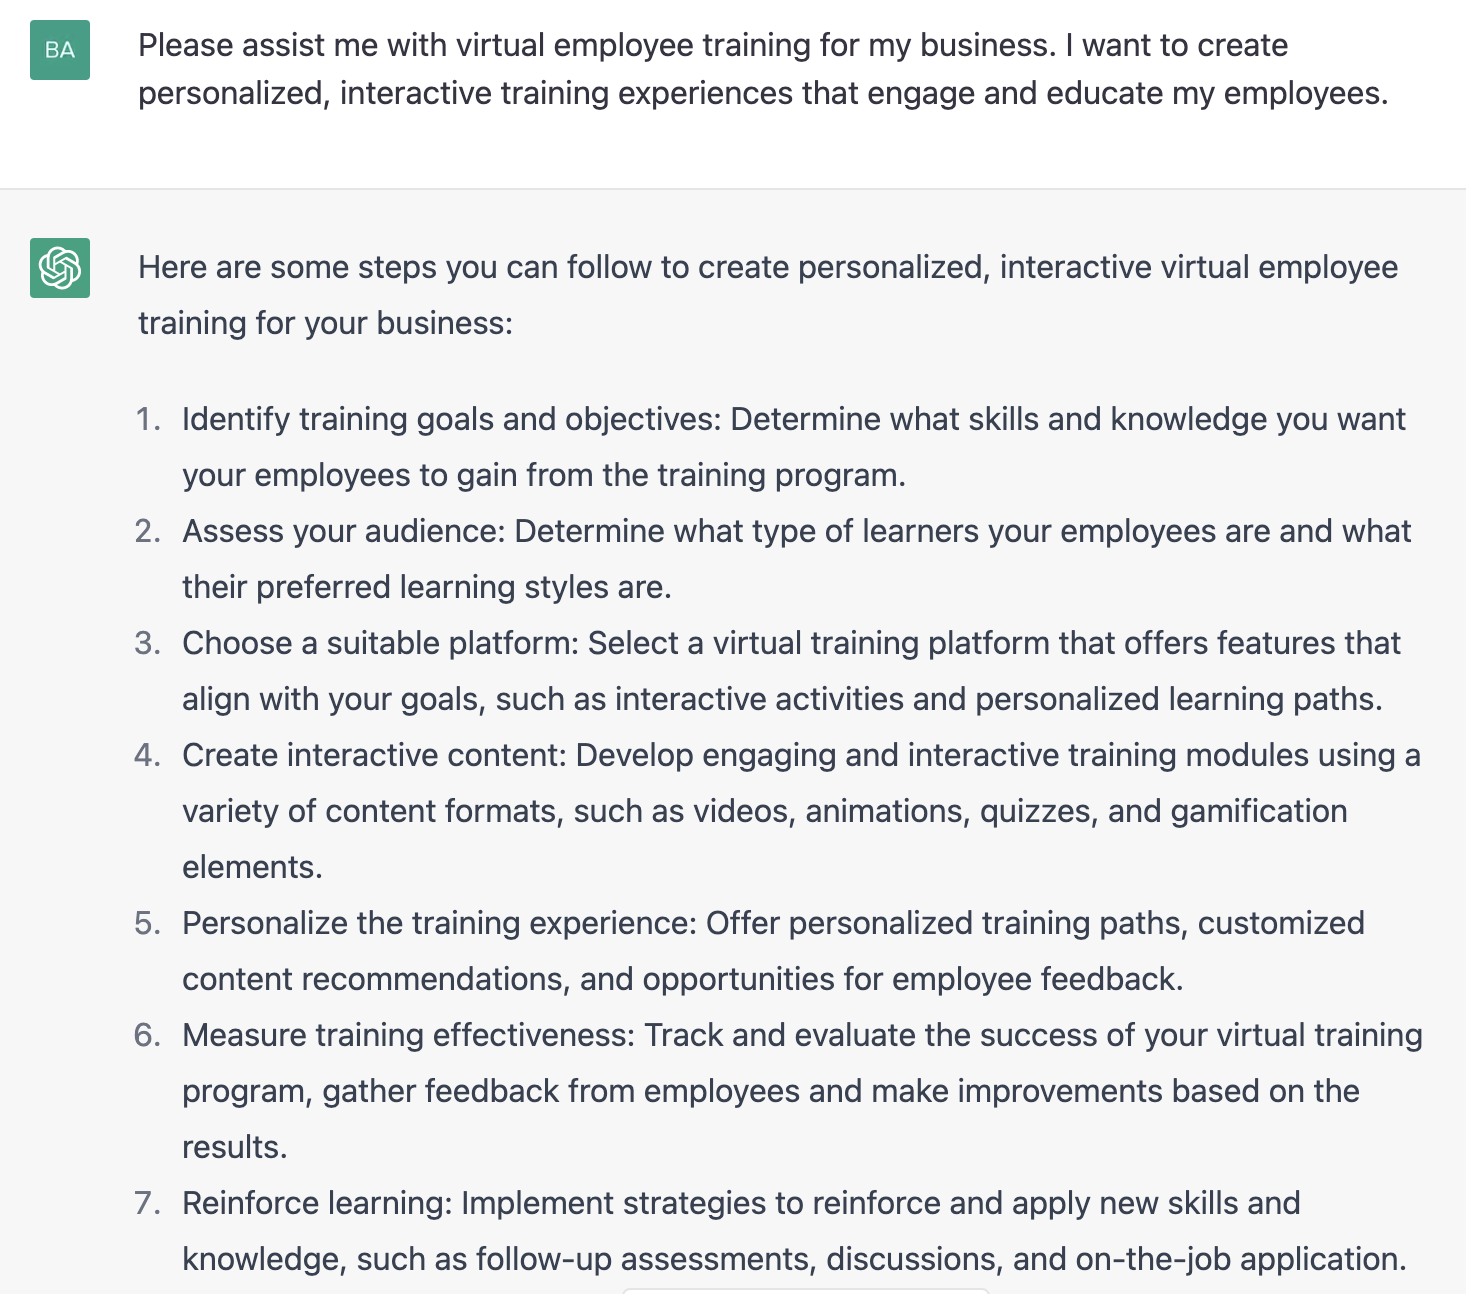 ChatGPT prompt about steps to create personalized, interactive virtual employee training for a business